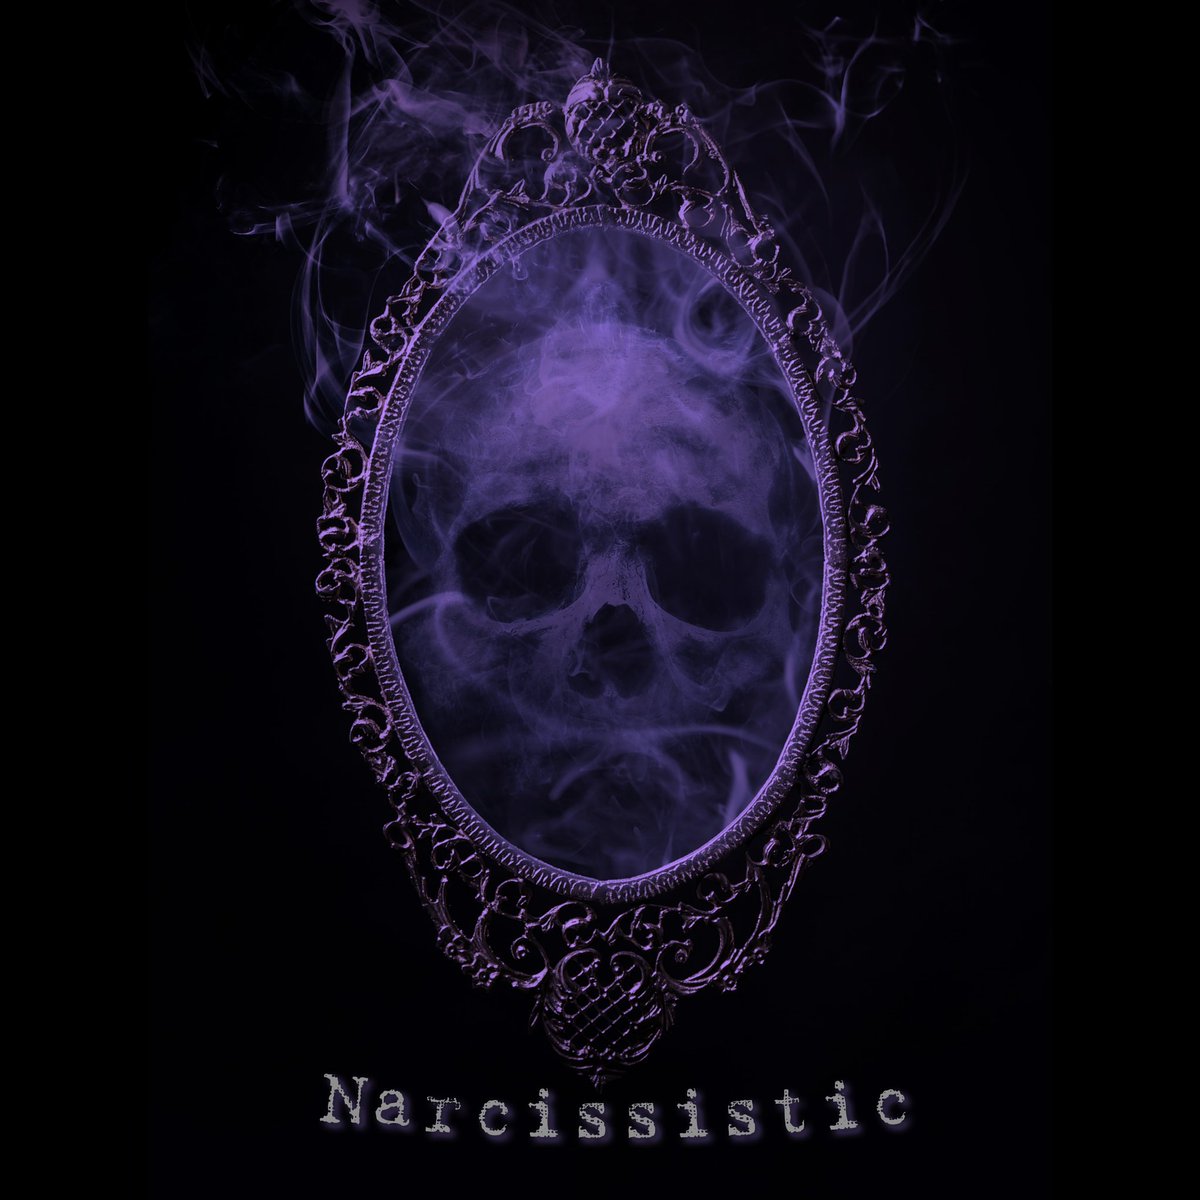 Hi Twitter! It’s been a while… I’ve fallen off the Twitter train for sure but I’m making my way back! I wanted to let you know about my new single “Narcissistic” that comes out March 15th! If you have an extra 30 seconds today… PRE SAVE: linktr.ee/abbykrocks